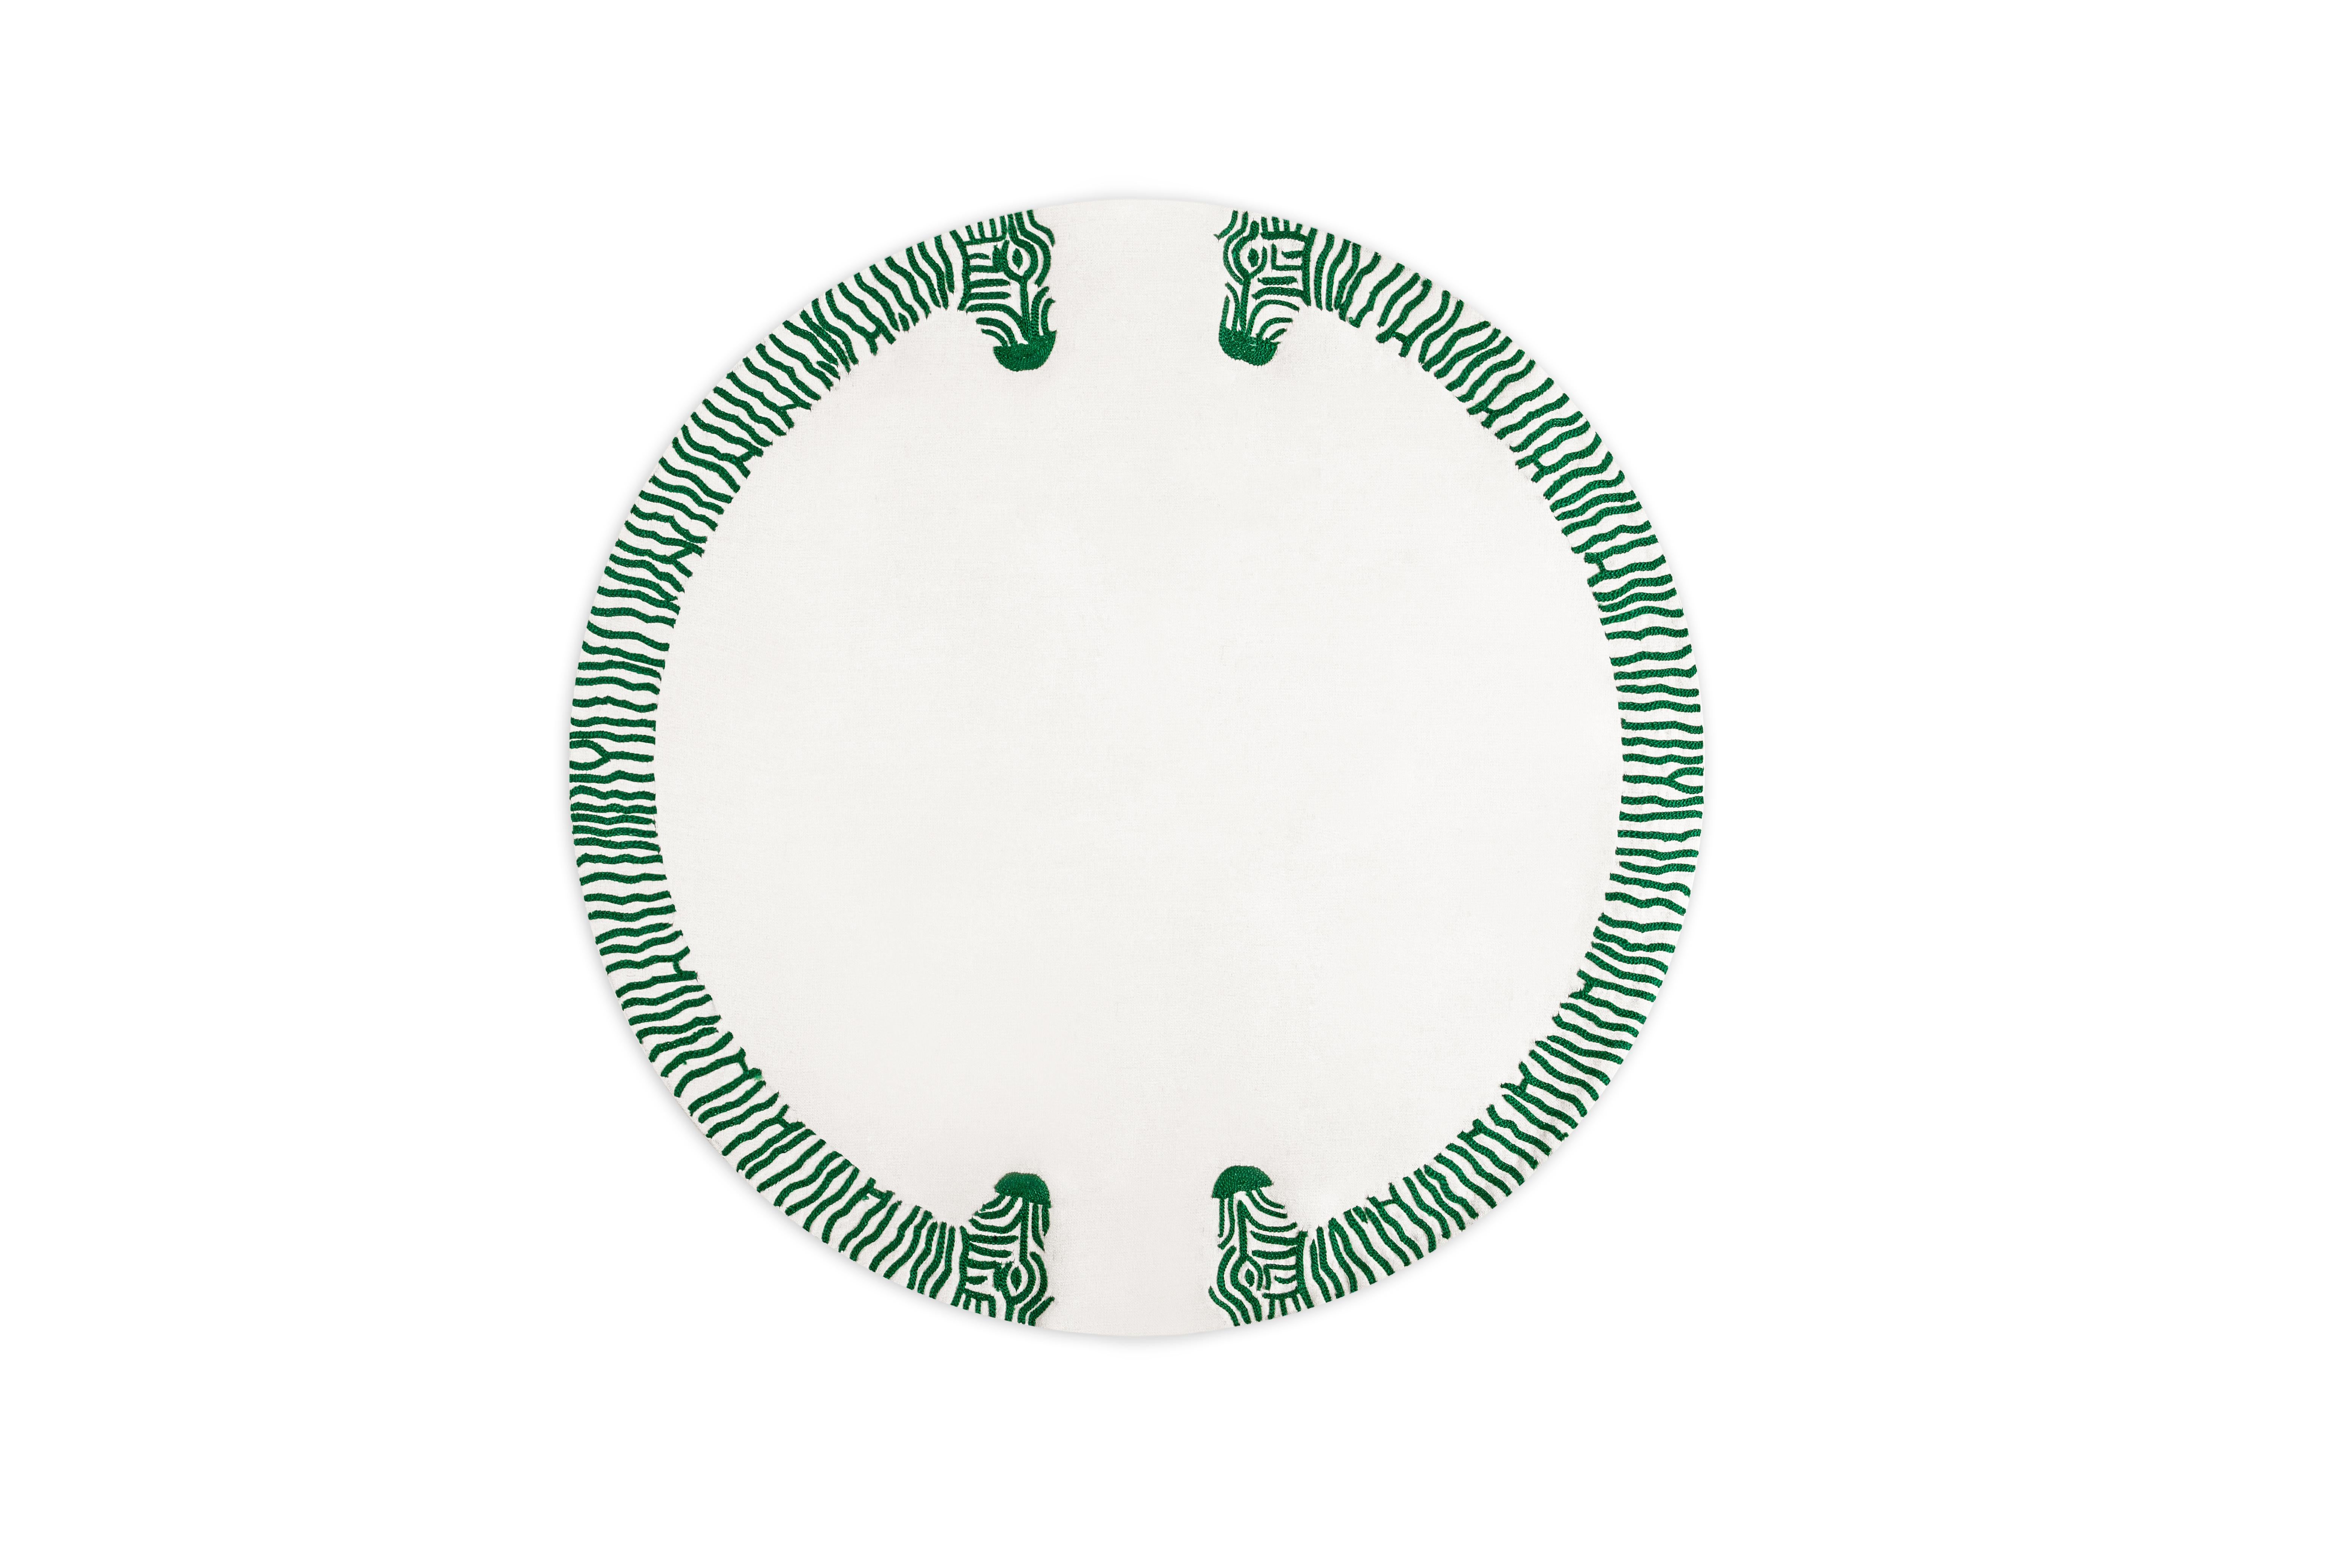 A couplet of double headed zebras come together in the all hand embroidered Les Roux Placemat. Using a traditional Indian Aari embroidery 
technique, each stripe showcases the emblematic zebra pattern.